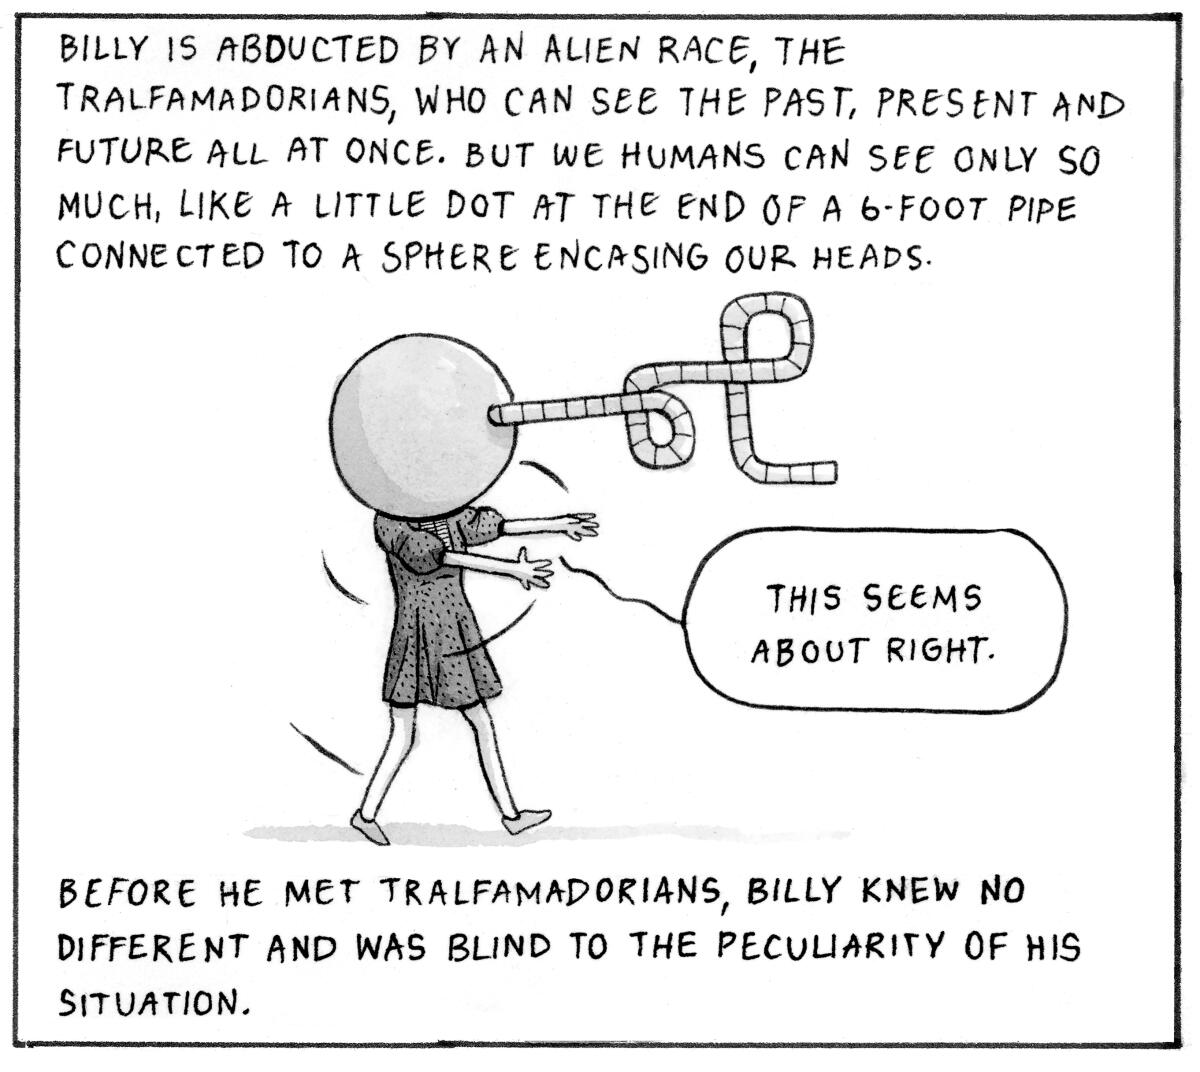 Billy is abducted by aliens who can see past, present and future. We humans can only see so much.